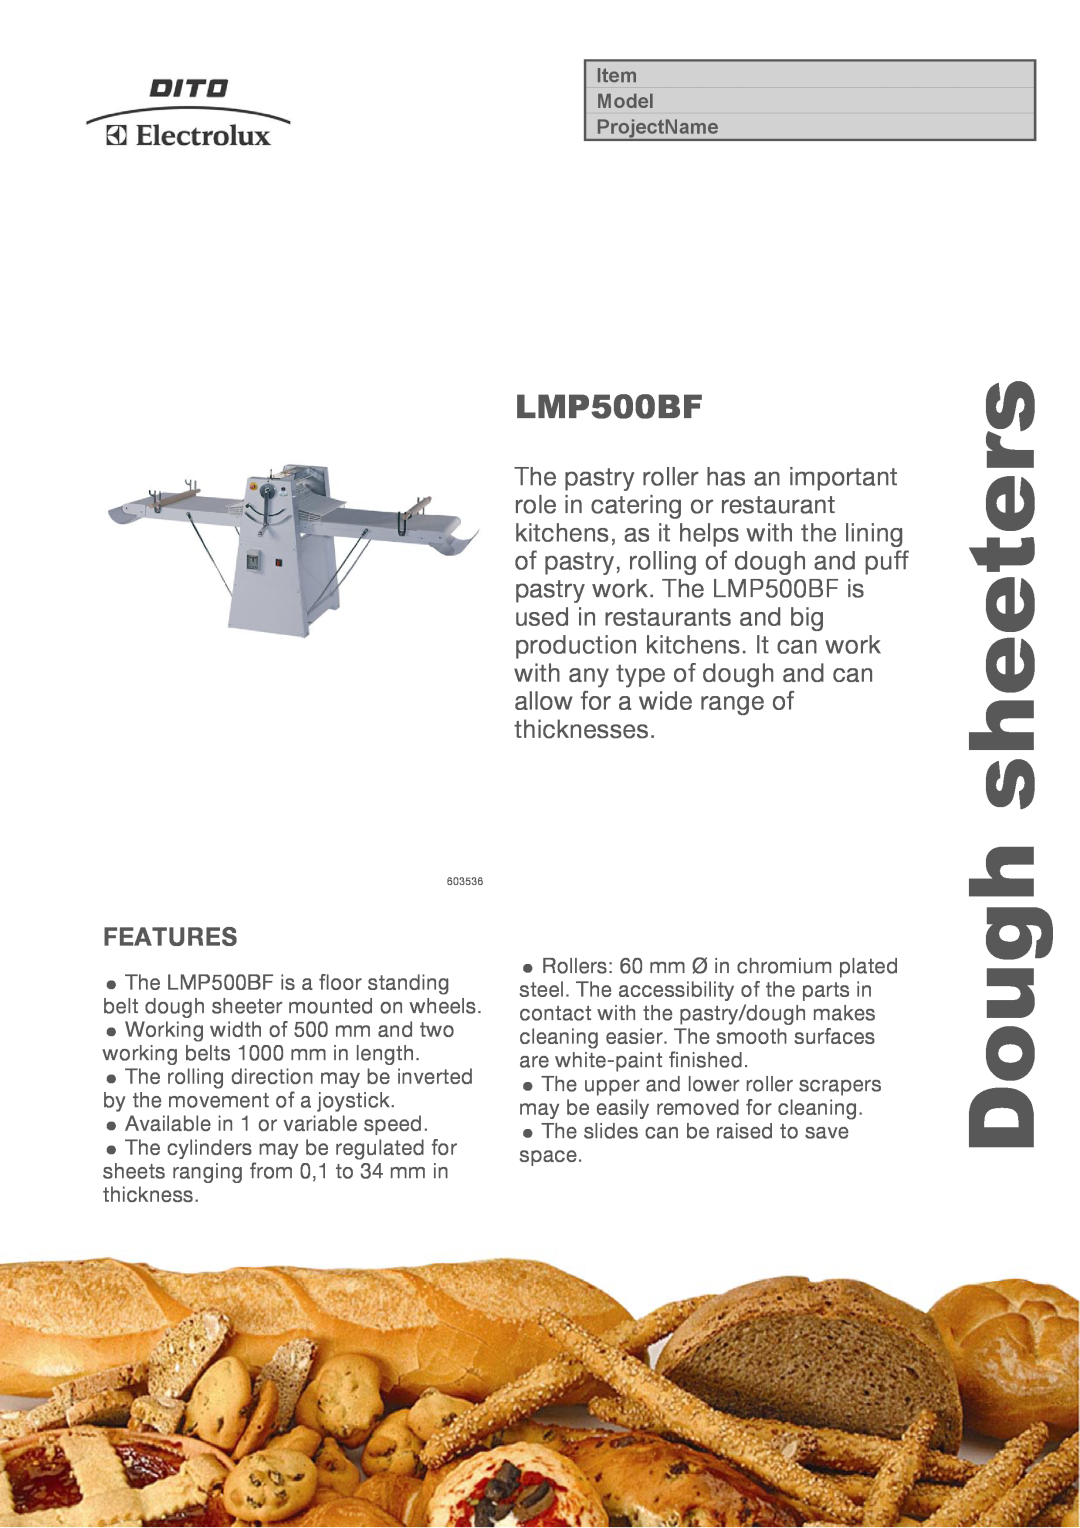 Electrolux LMP500BF manual Features, sheeters, Dough 